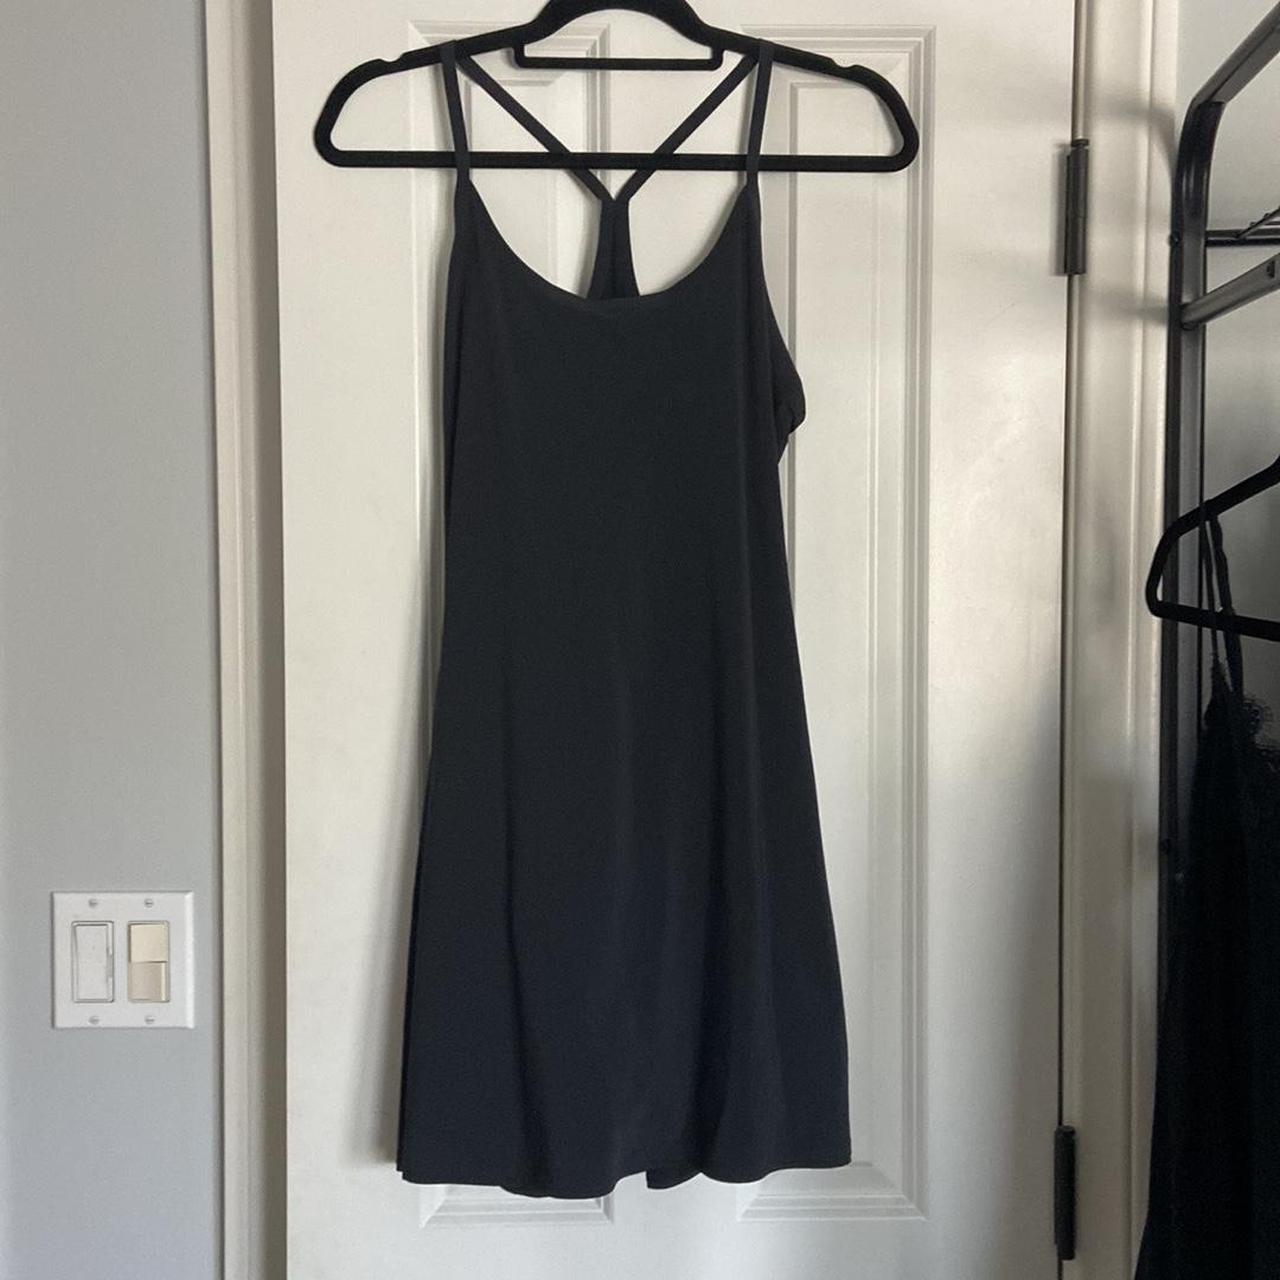 Outdoor Voices Exercise Dress in black, Retail